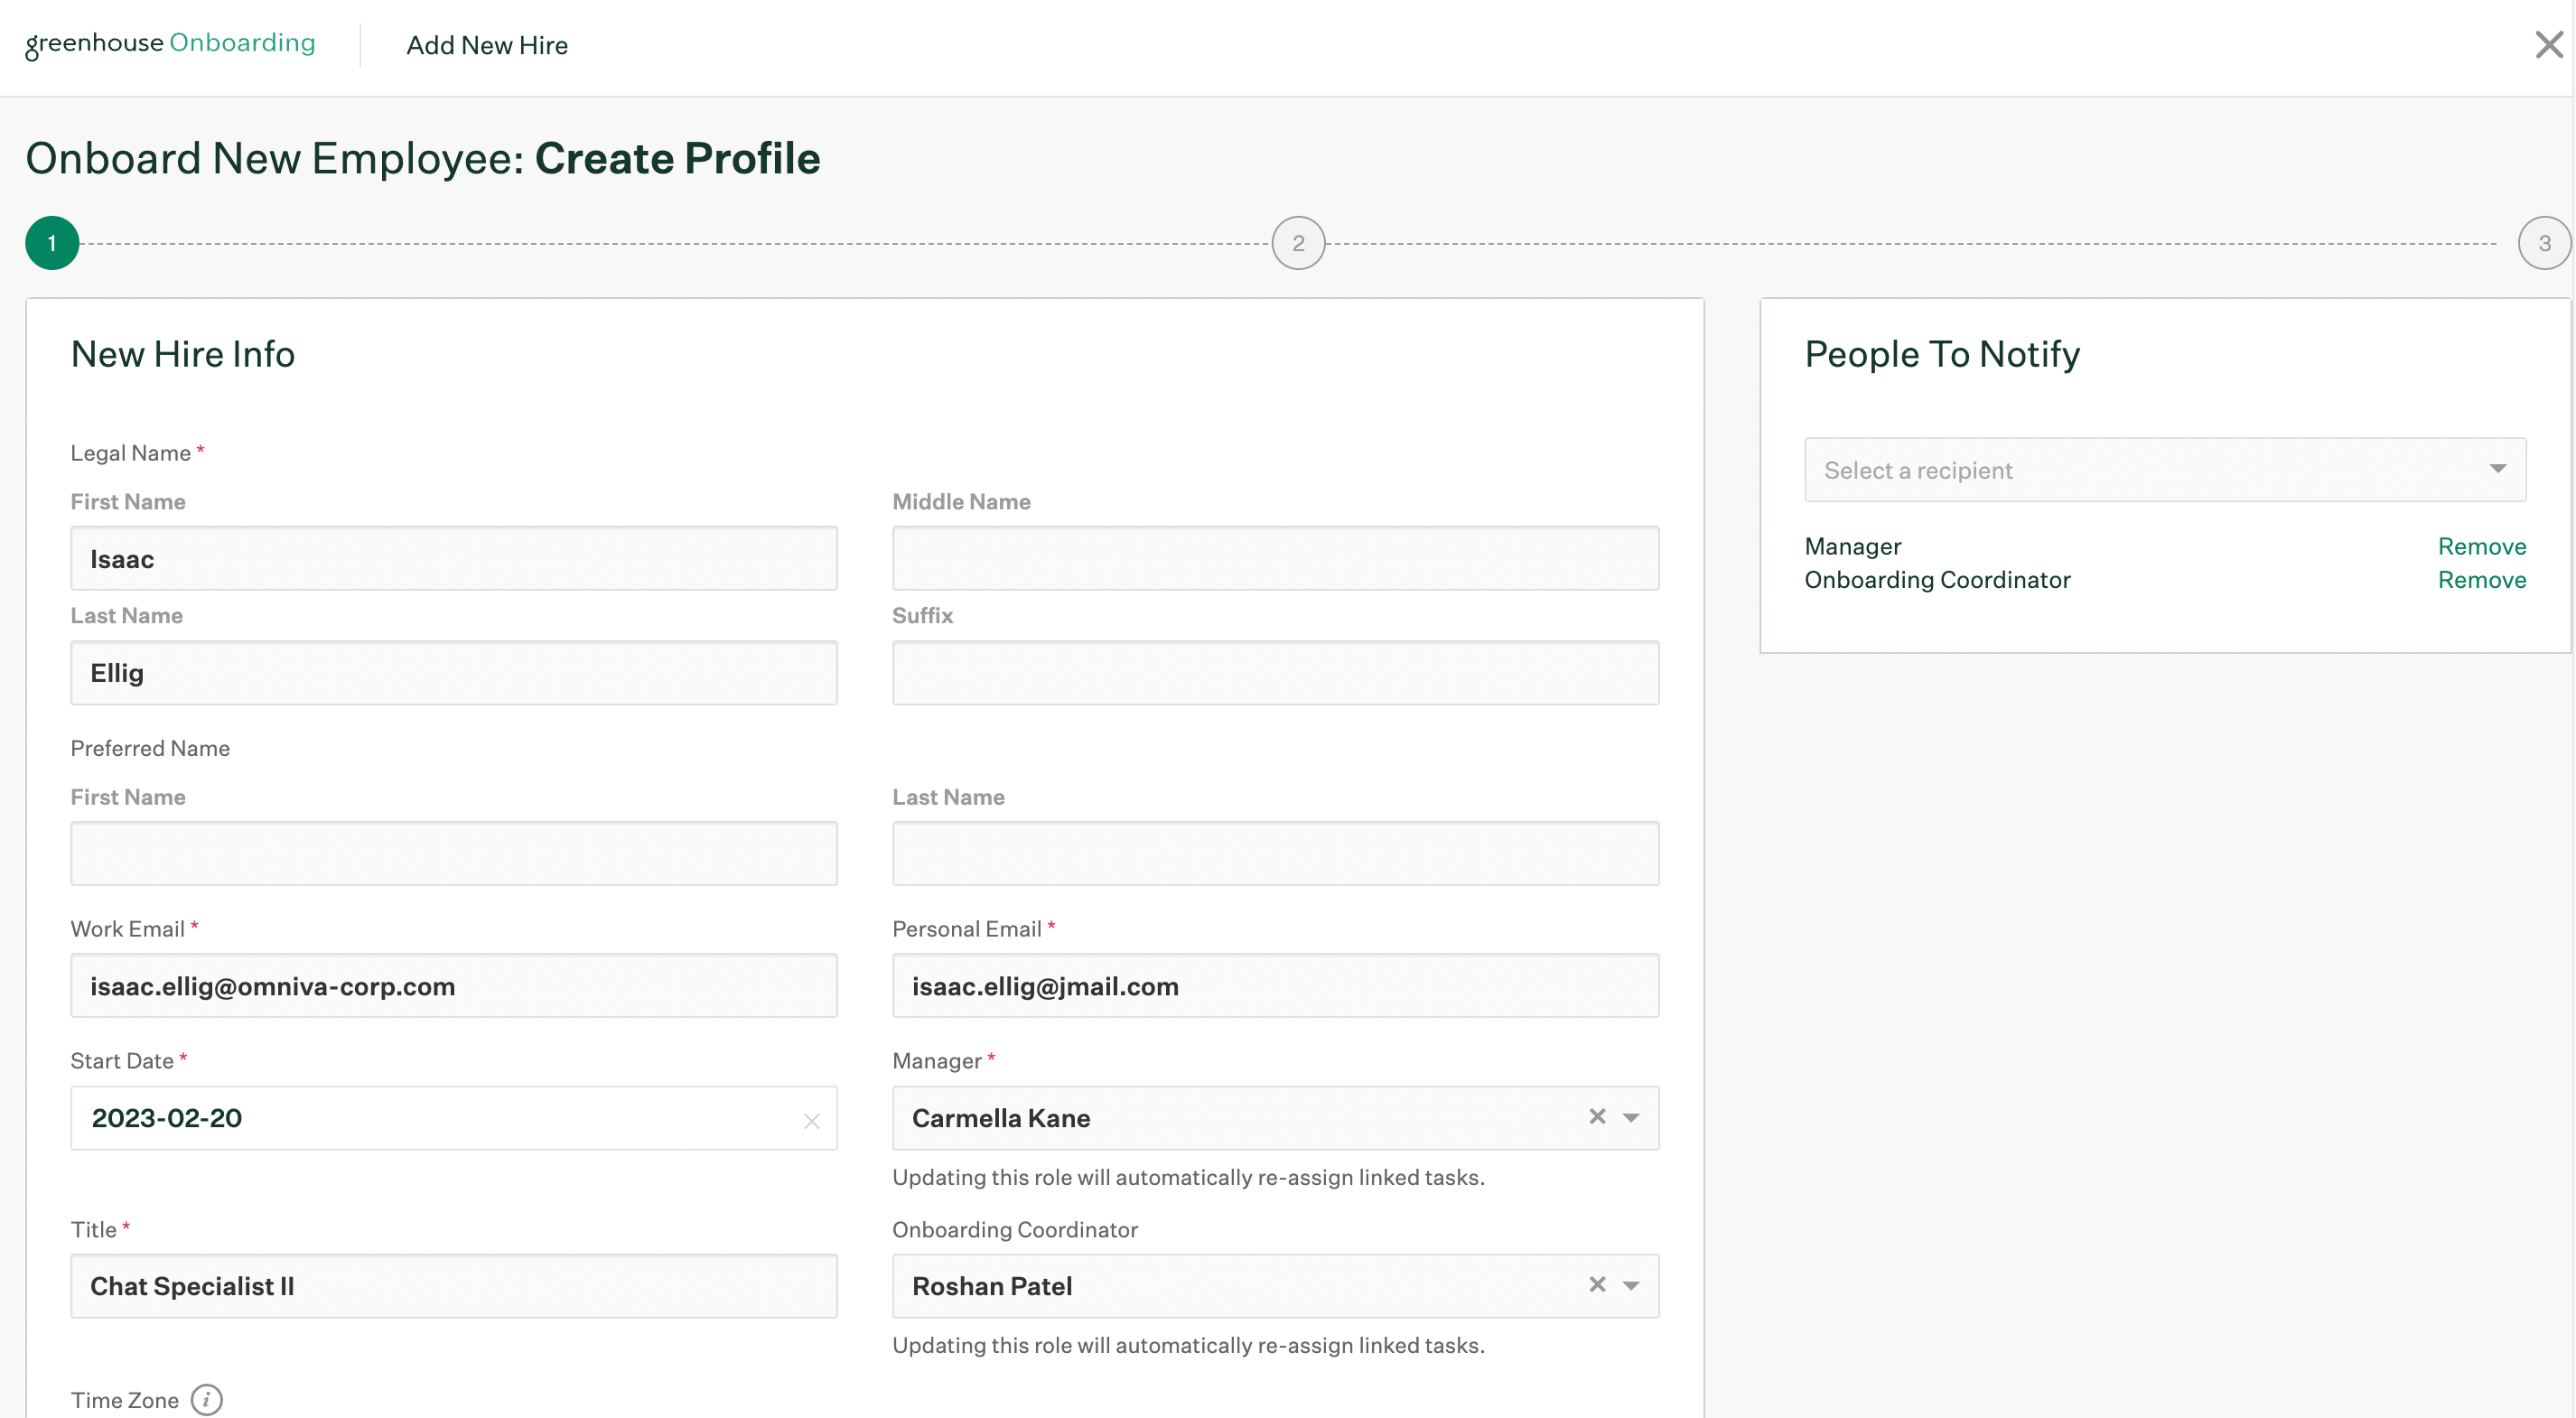 Create-Profile-page-with-employee-profile-fields-filled-out.png